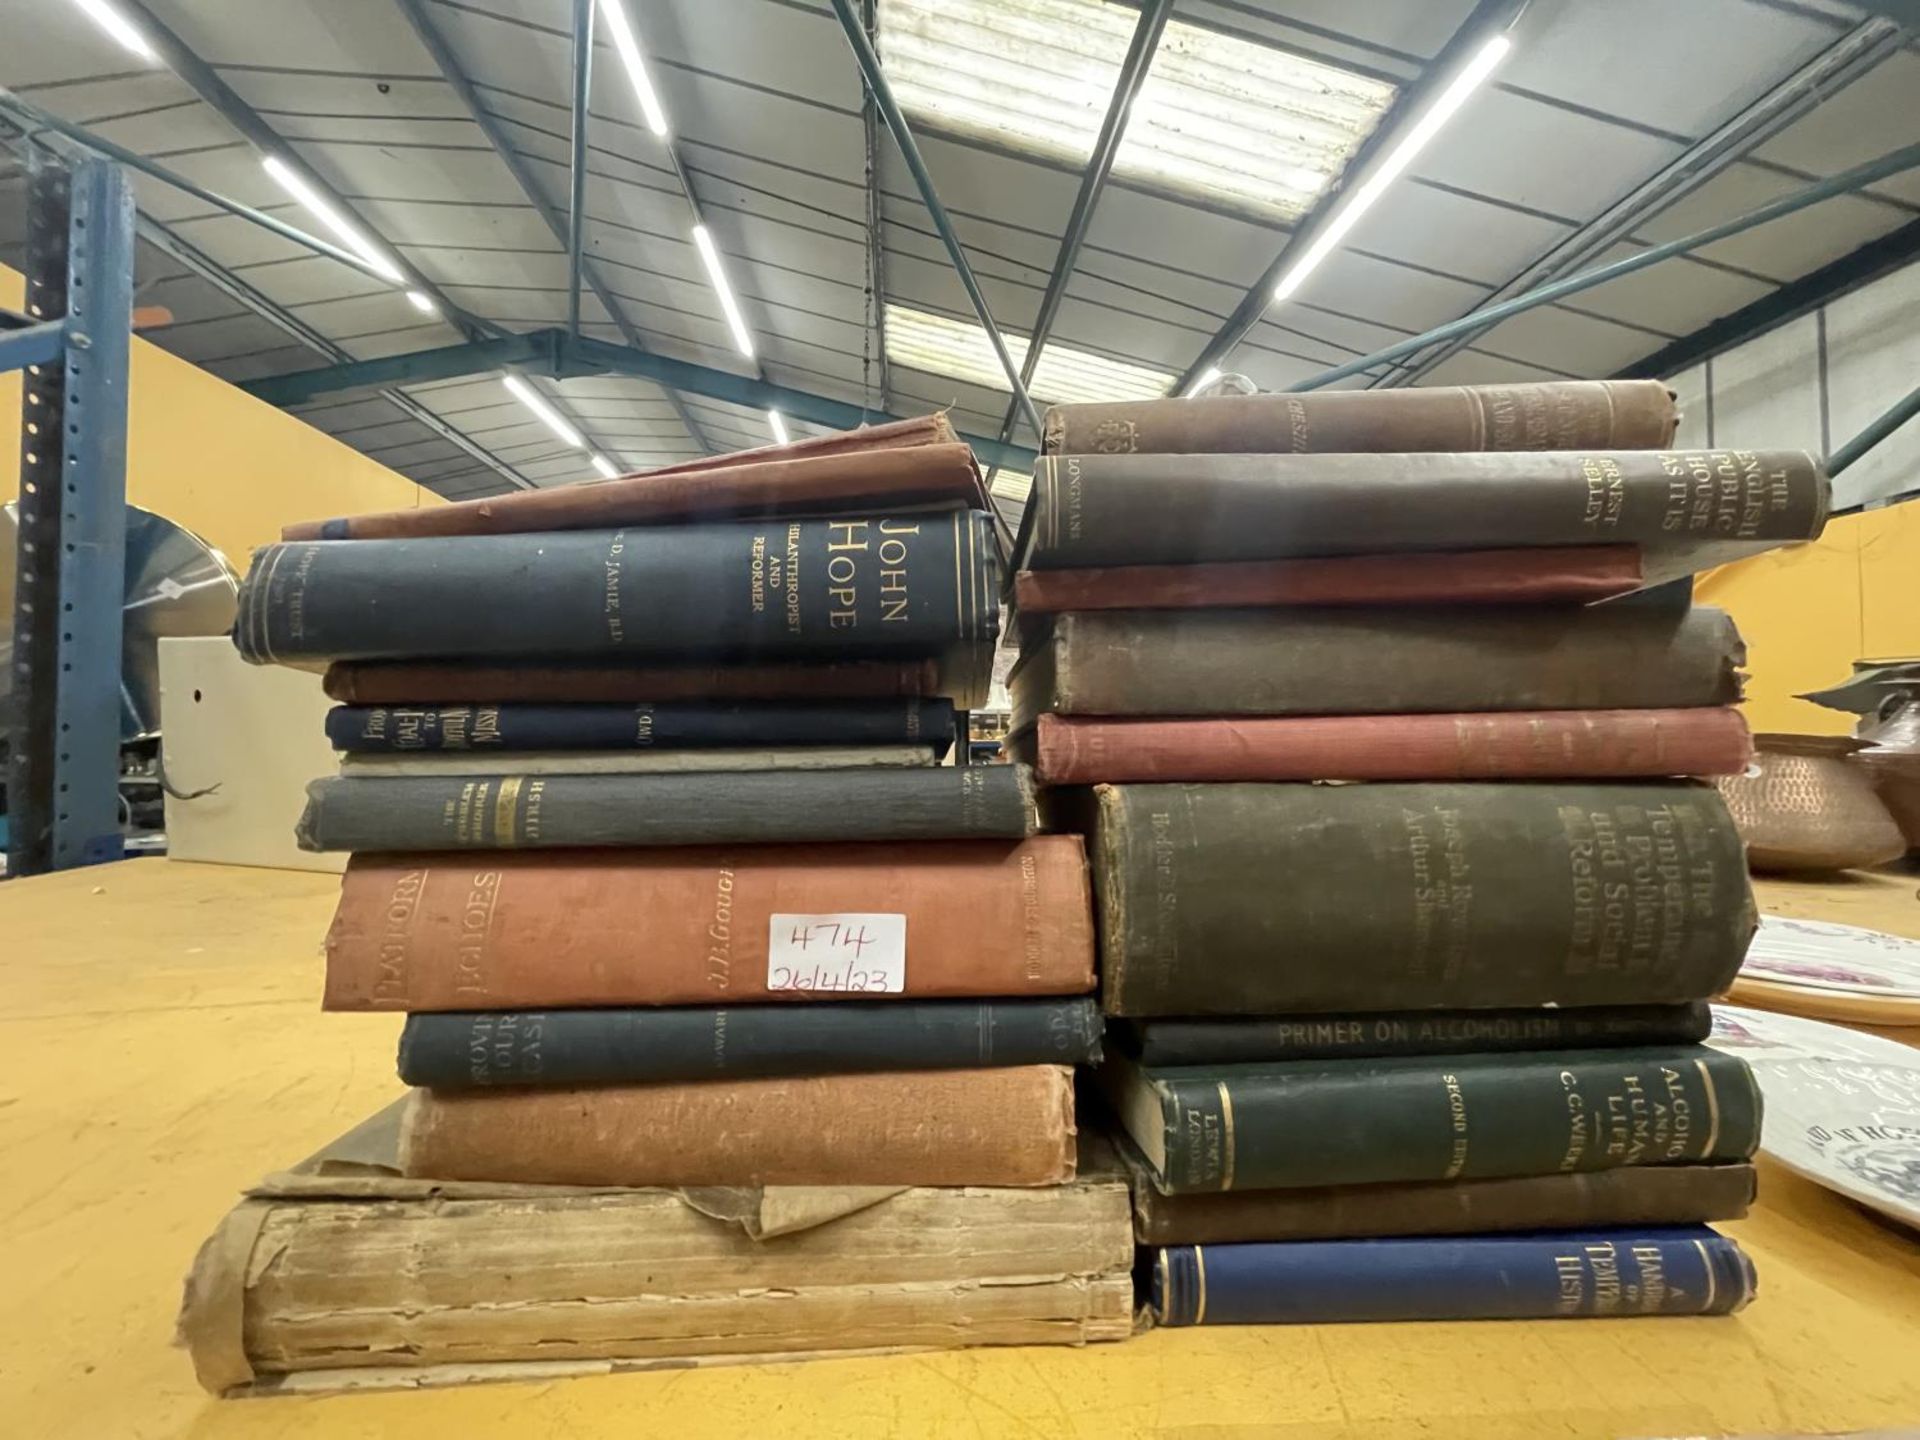 A QUANTITY OF VINTAGE BOOKS RELATING TO TEMPERANCE AND ALCOHOL